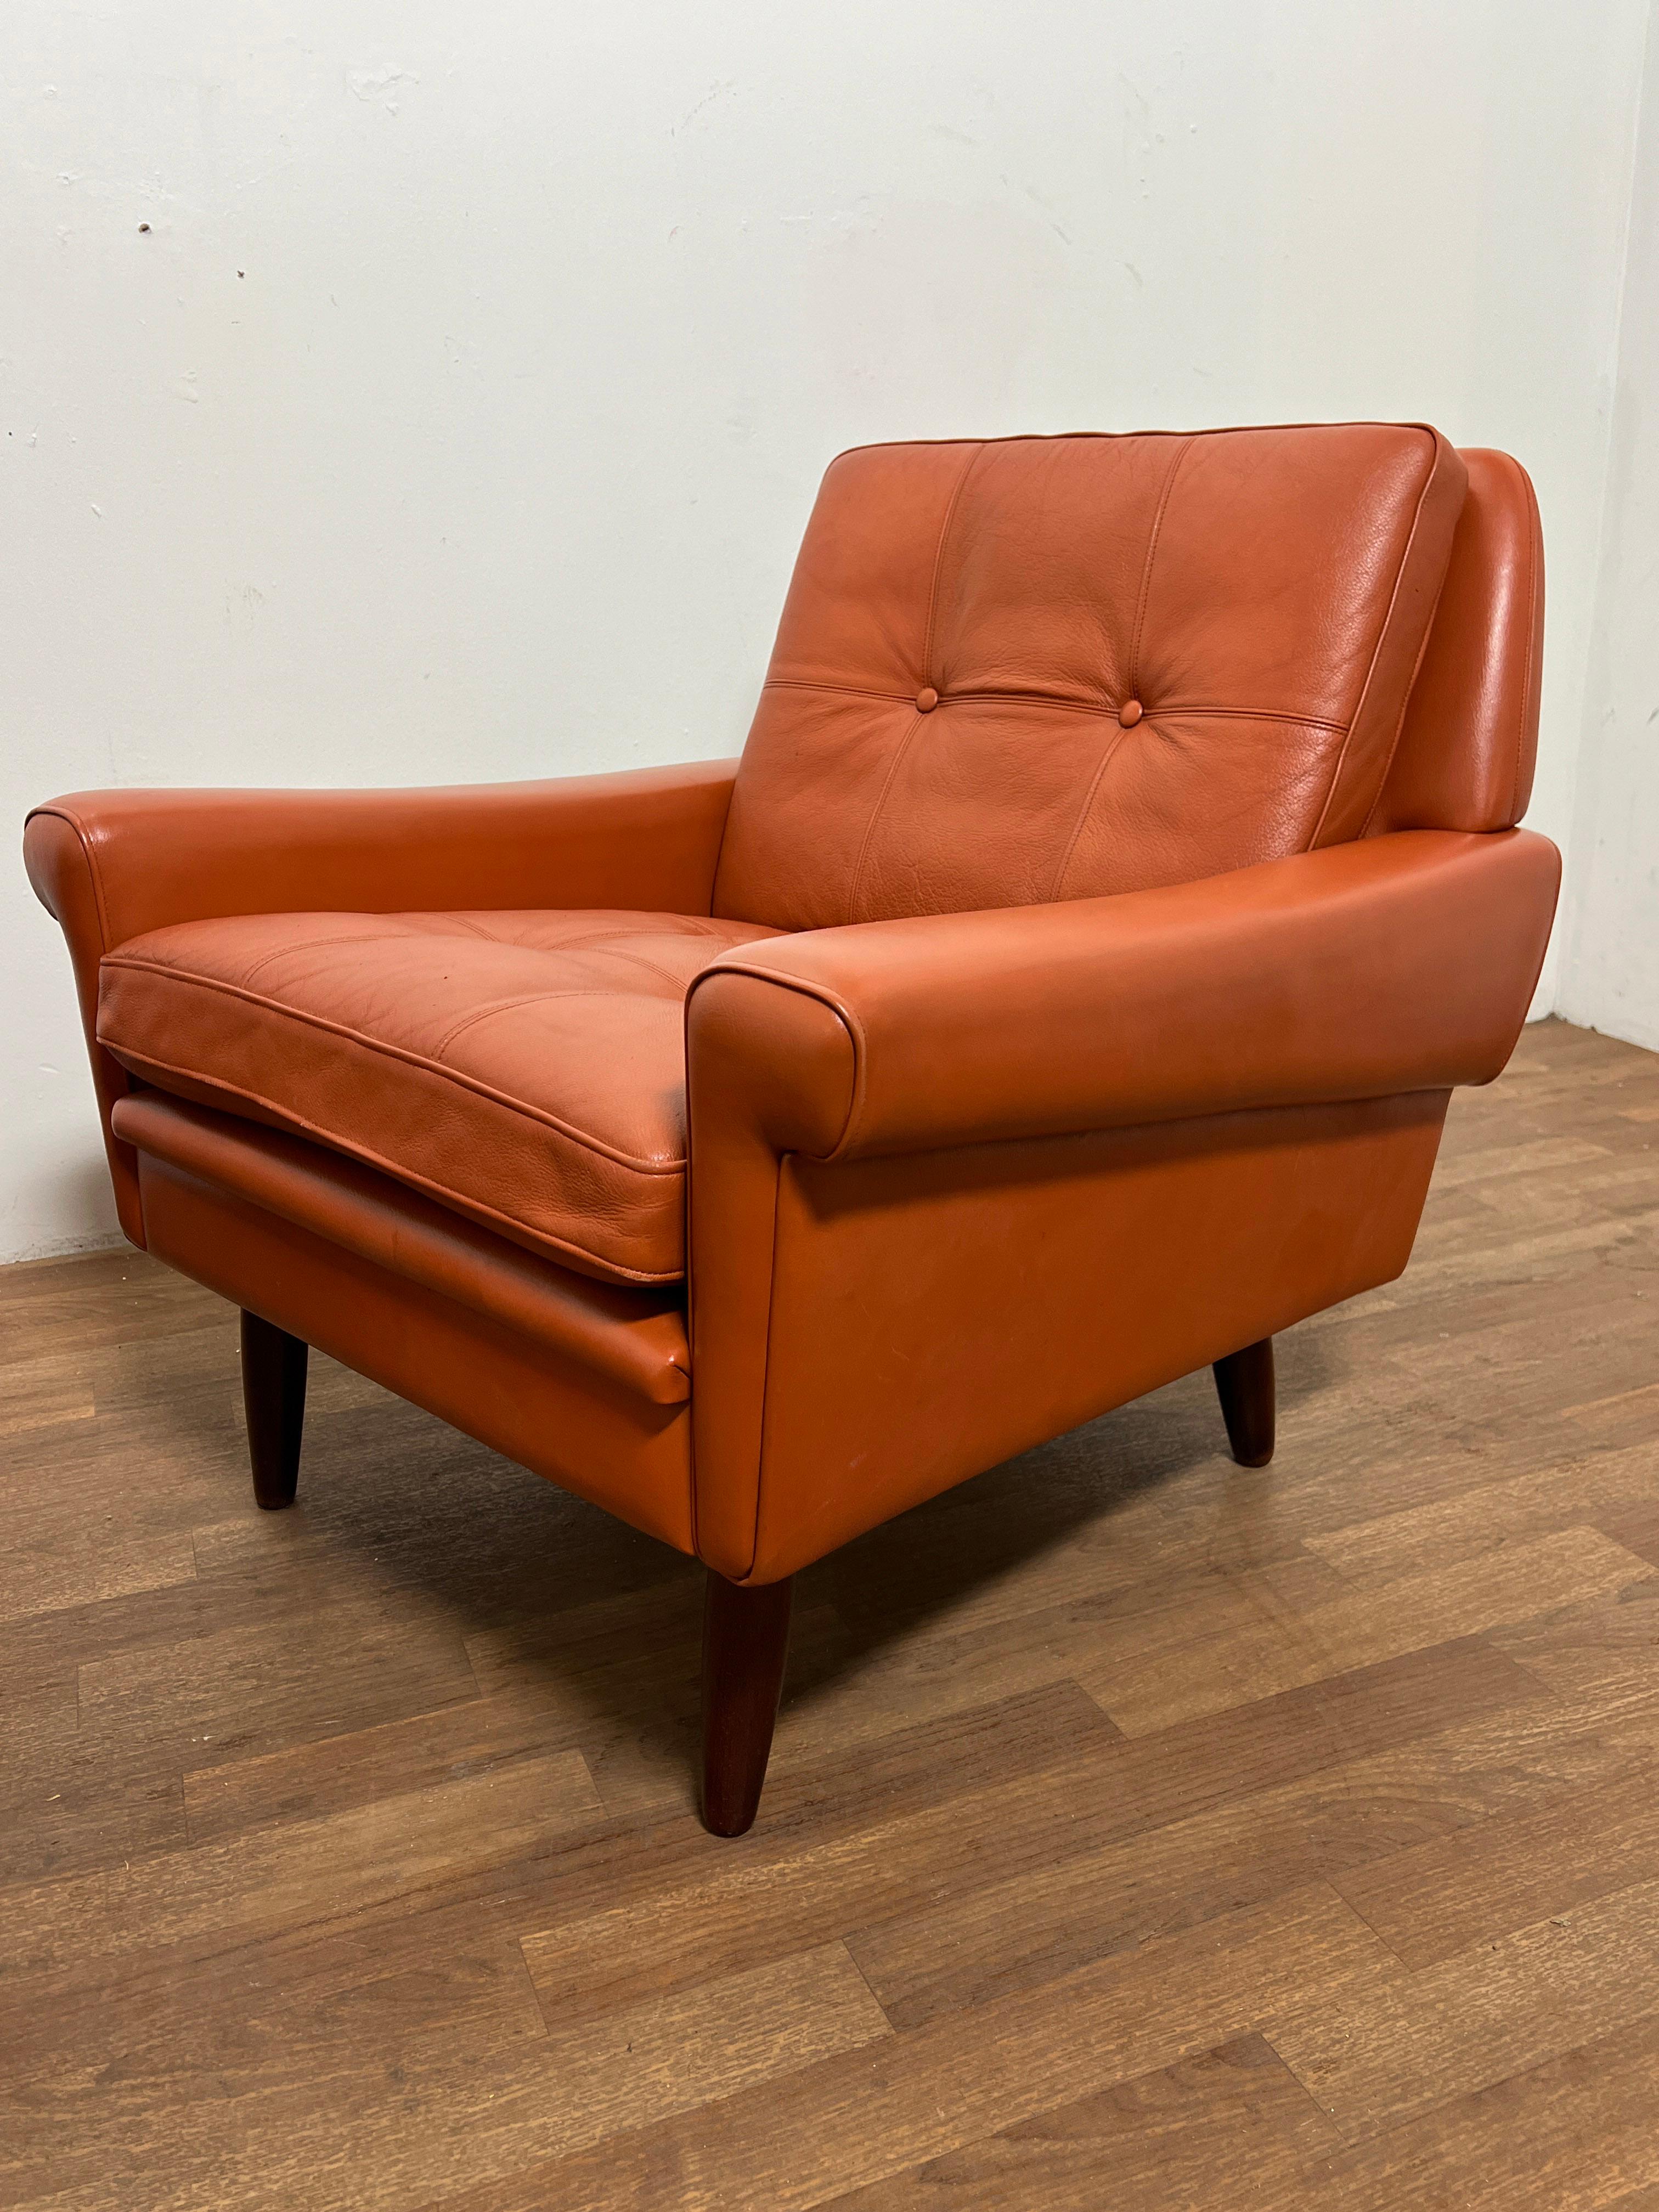 Scandinavian Modern Pair of Danish Leather Lounge Chairs by Svend Skipper, Circa 1960s For Sale